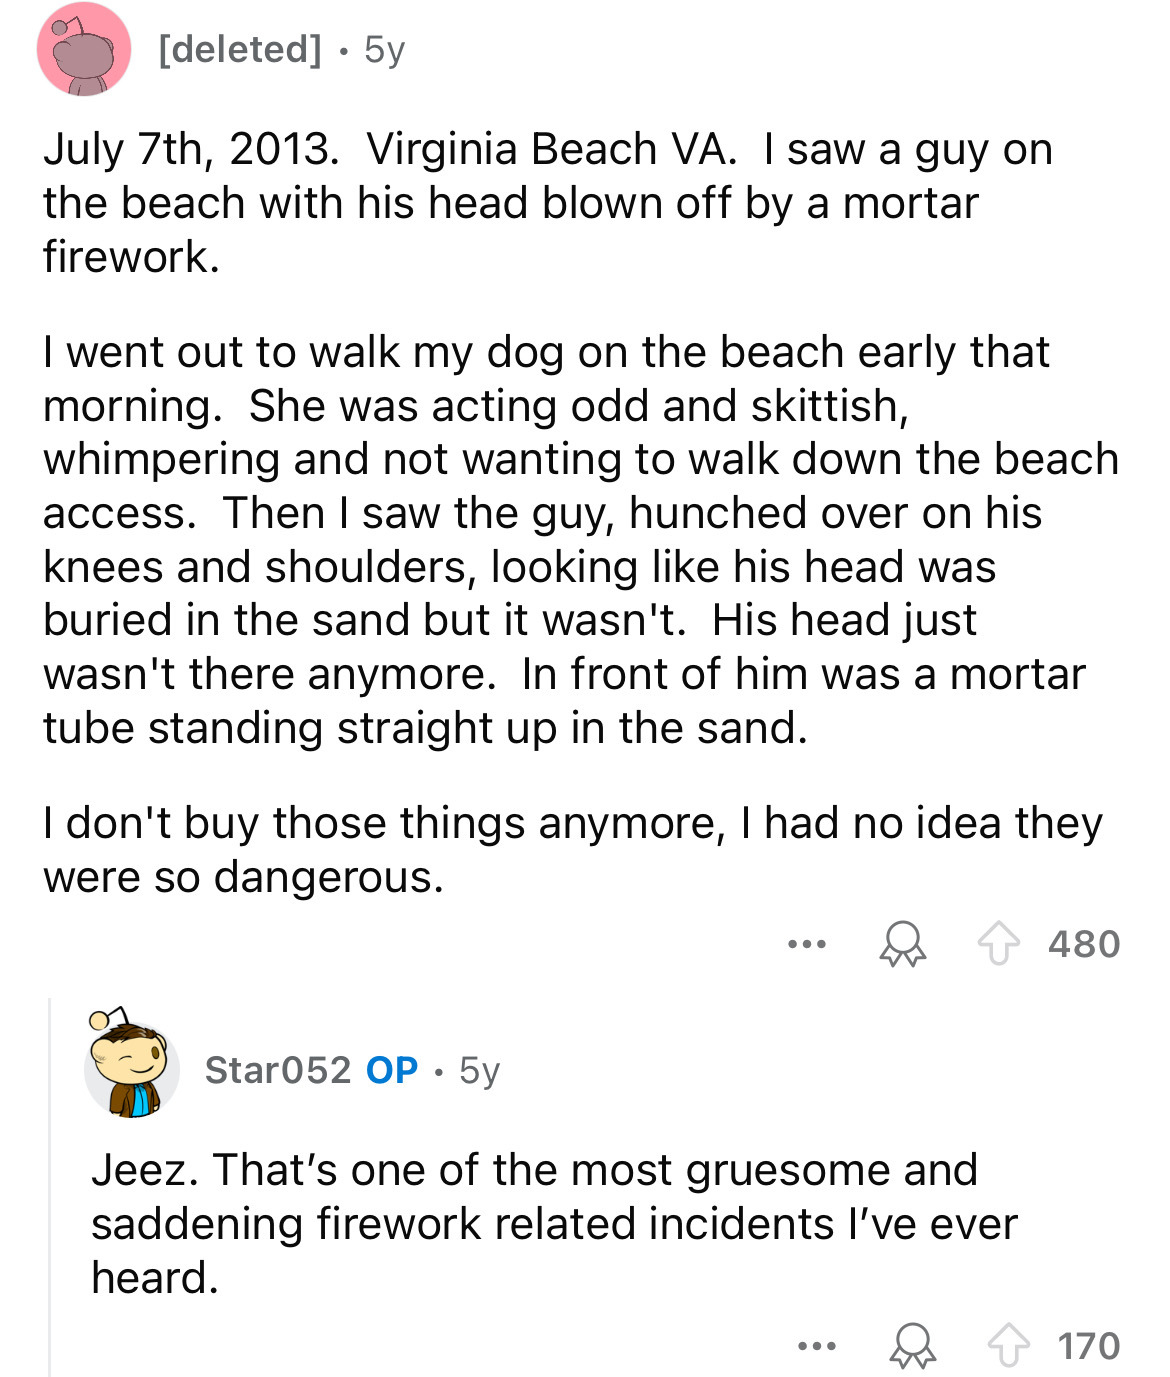 document - deleted 5y July 7th, 2013. Virginia Beach Va. I saw a guy on the beach with his head blown off by a mortar firework. I went out to walk my dog on the beach early that morning. She was acting odd and skittish, whimpering and not wanting to walk 